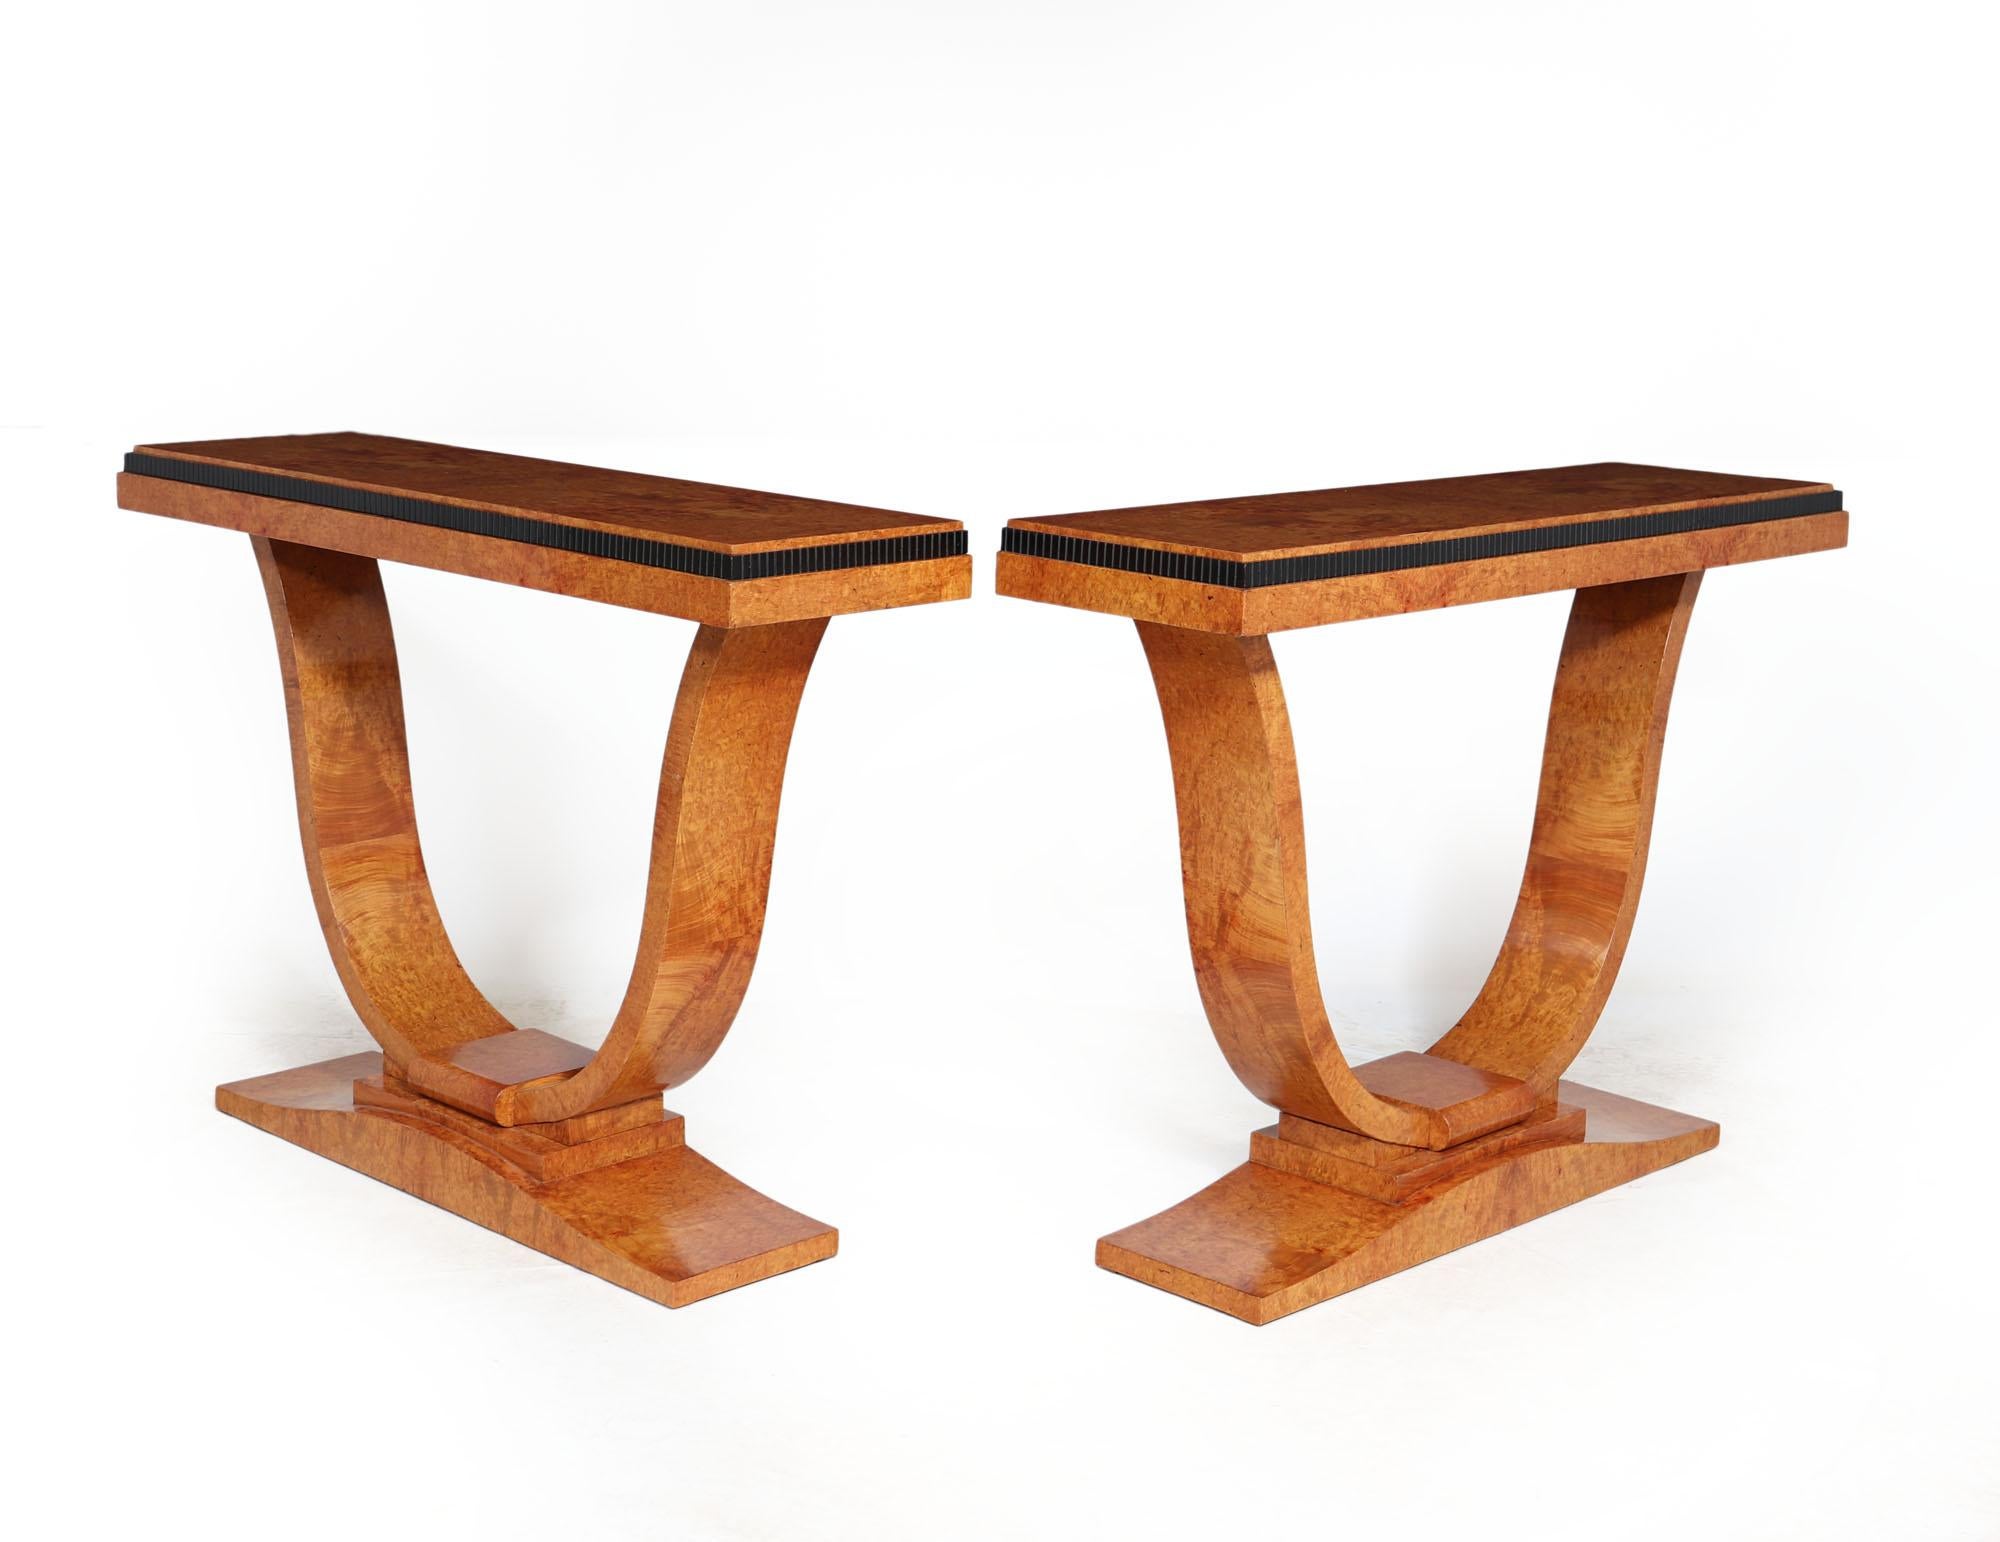 An exceptional quality and for pair of console tables produced in amboyna in France in 1925, having shaped base and u shaped uprights with reeded ebonies detail around the top step, extensive burr and figuring to the veneers and great colour the se